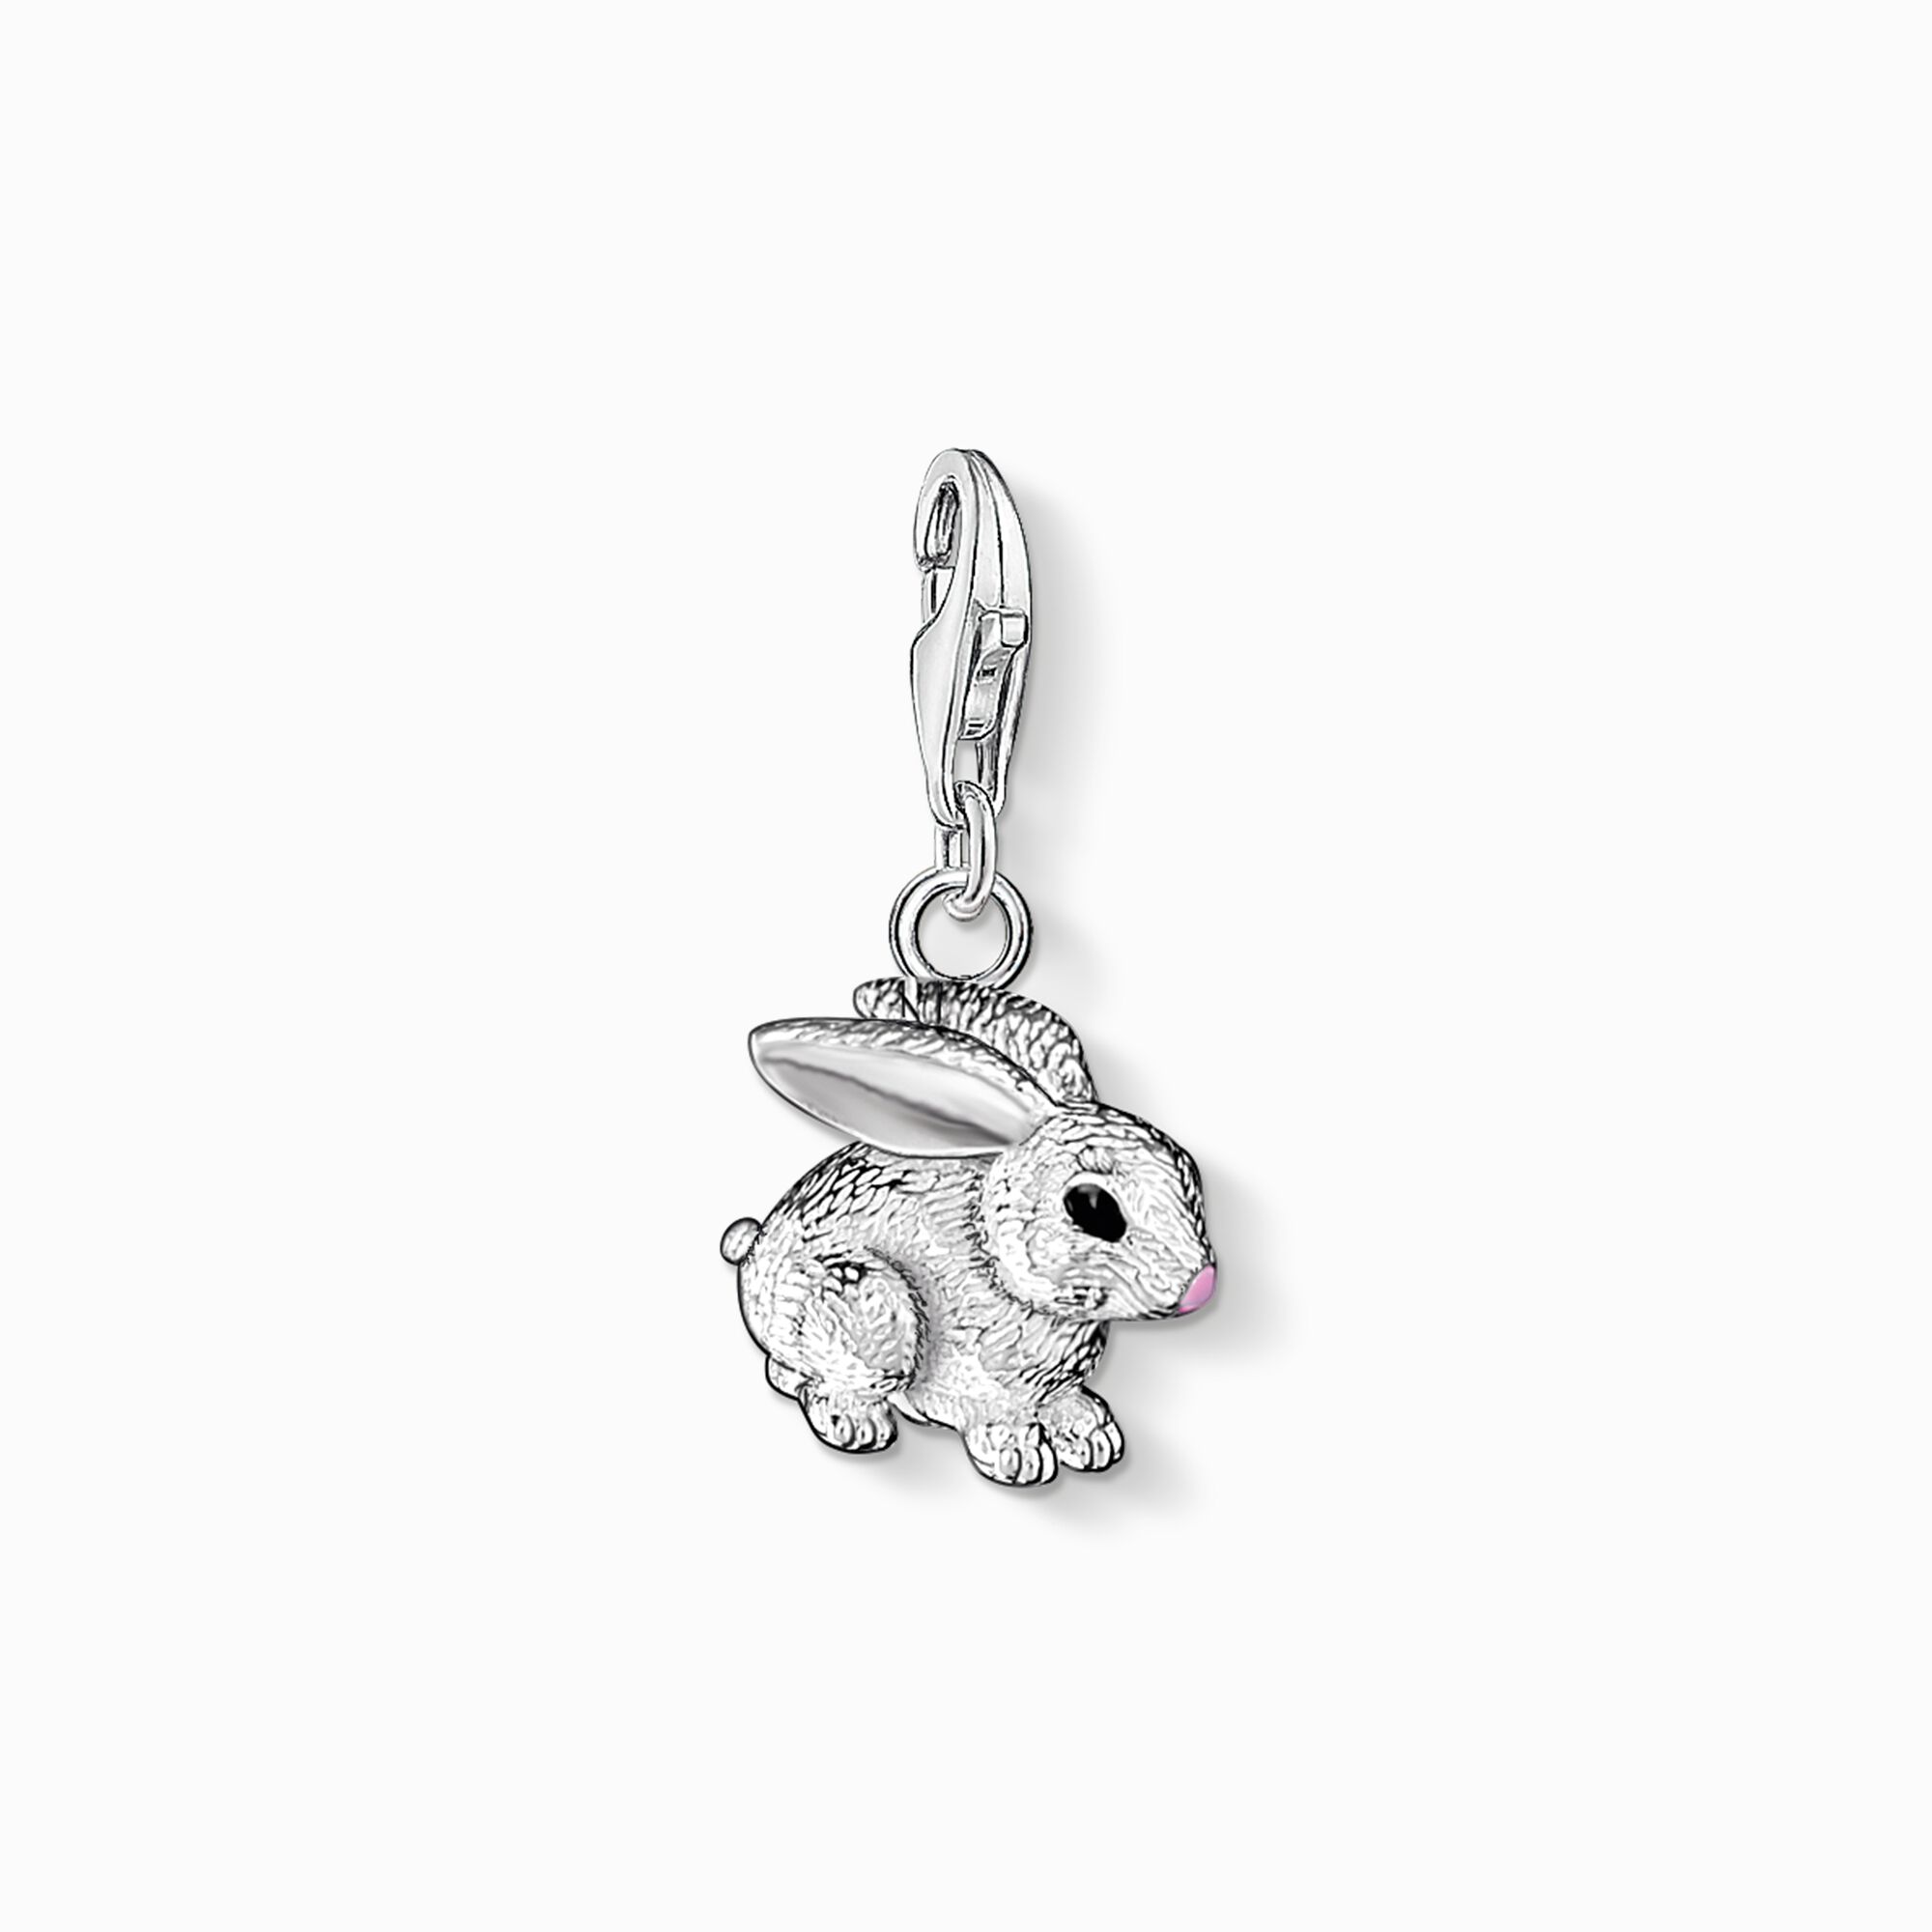 Charm pendant rabbit from the Charm Club collection in the THOMAS SABO online store